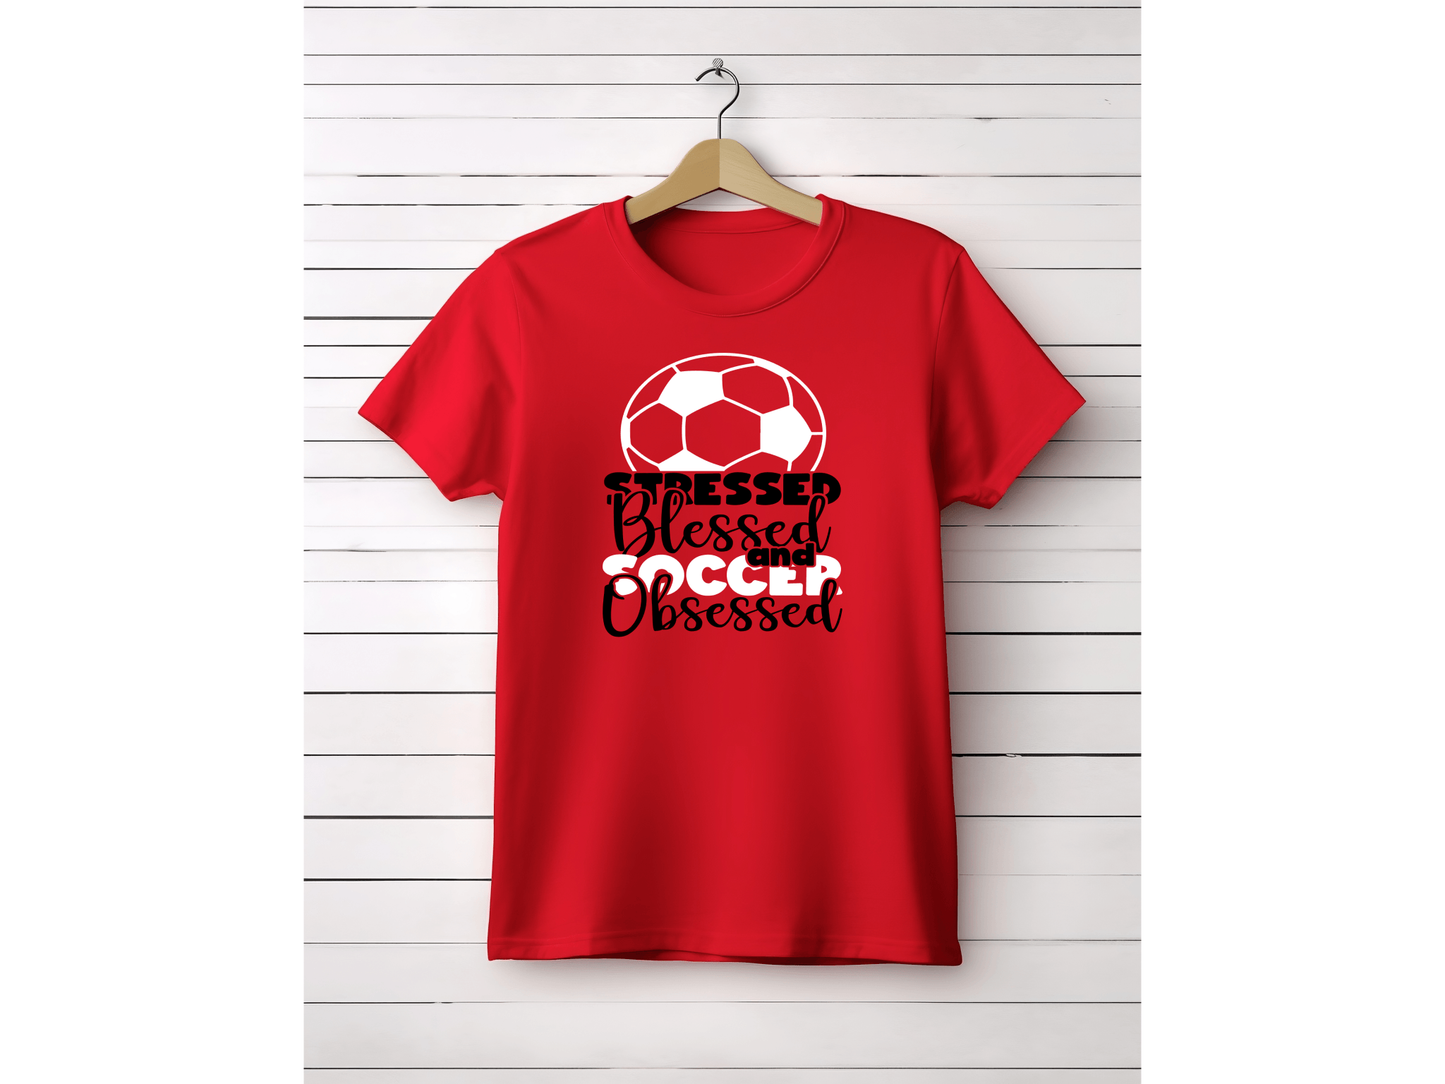 Stressed, Blessed and Soccer Obsessed Top